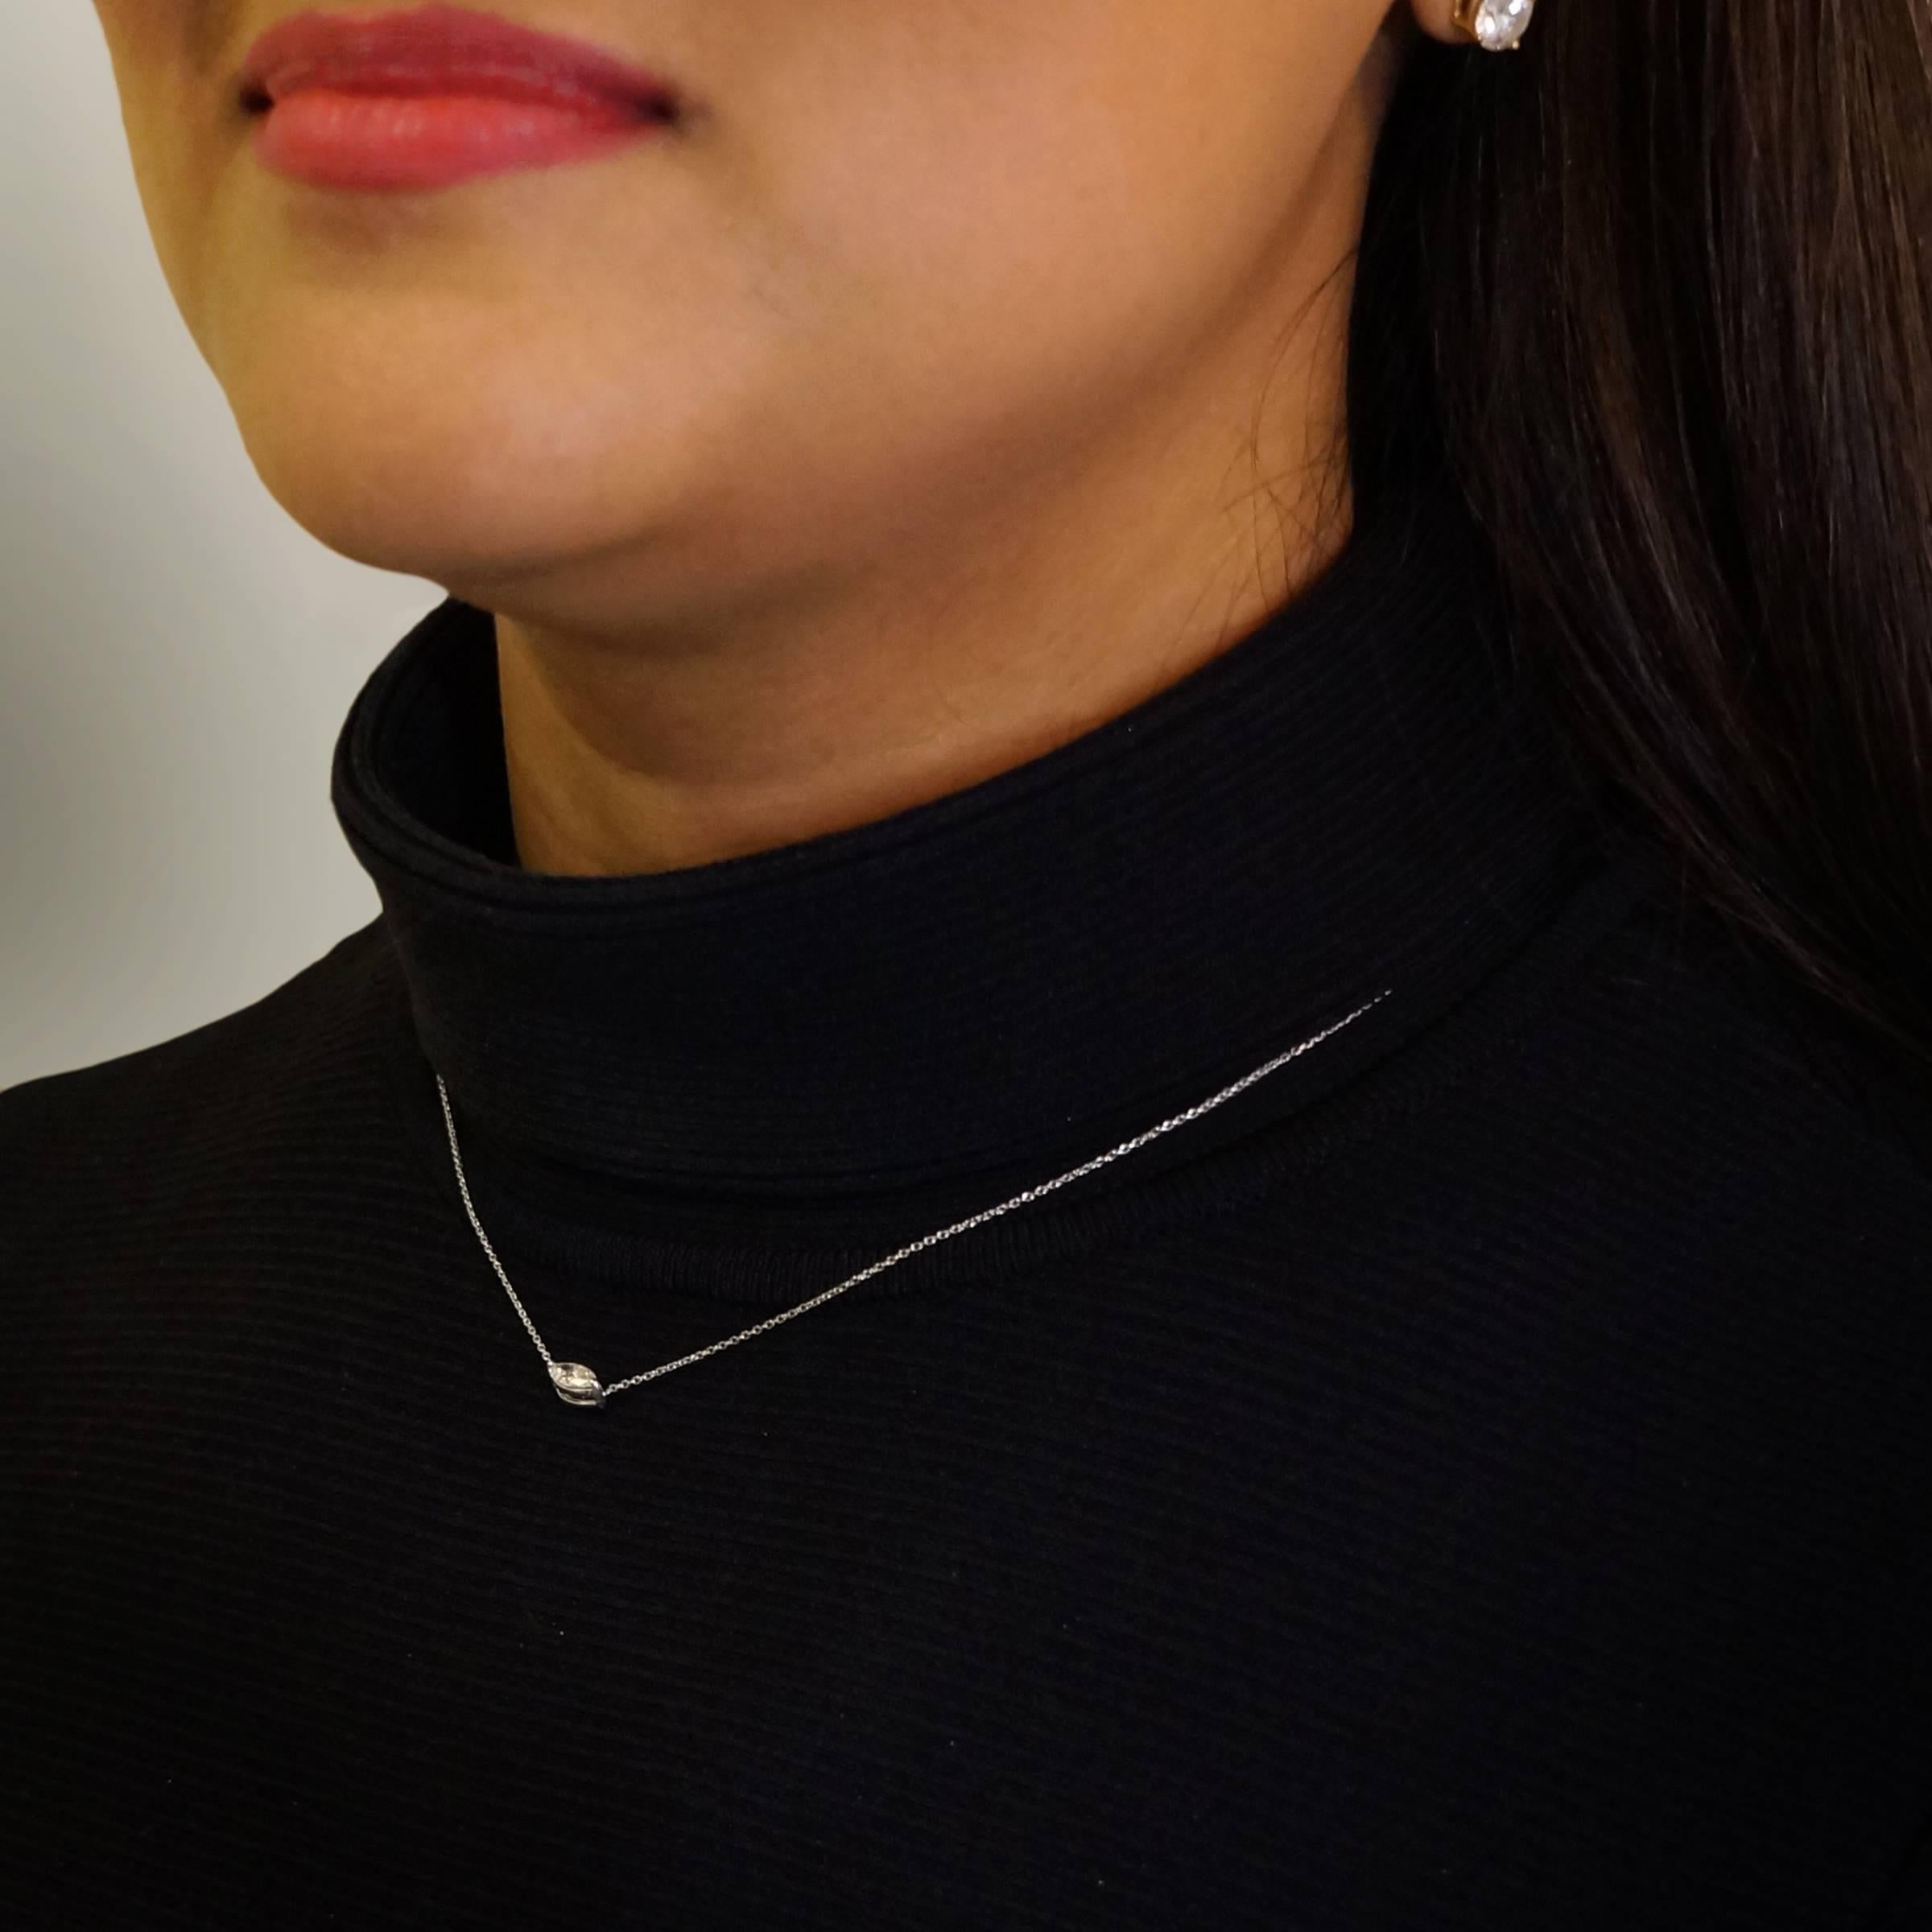 Simple yet elegant, Ri Noor's East West Marquise Diamond Solitaire Necklace sparkles as the intricate cuts of the stones reflect light. The necklace features a marquise diamond set in 18k white gold. Designed to transition from day to night, the